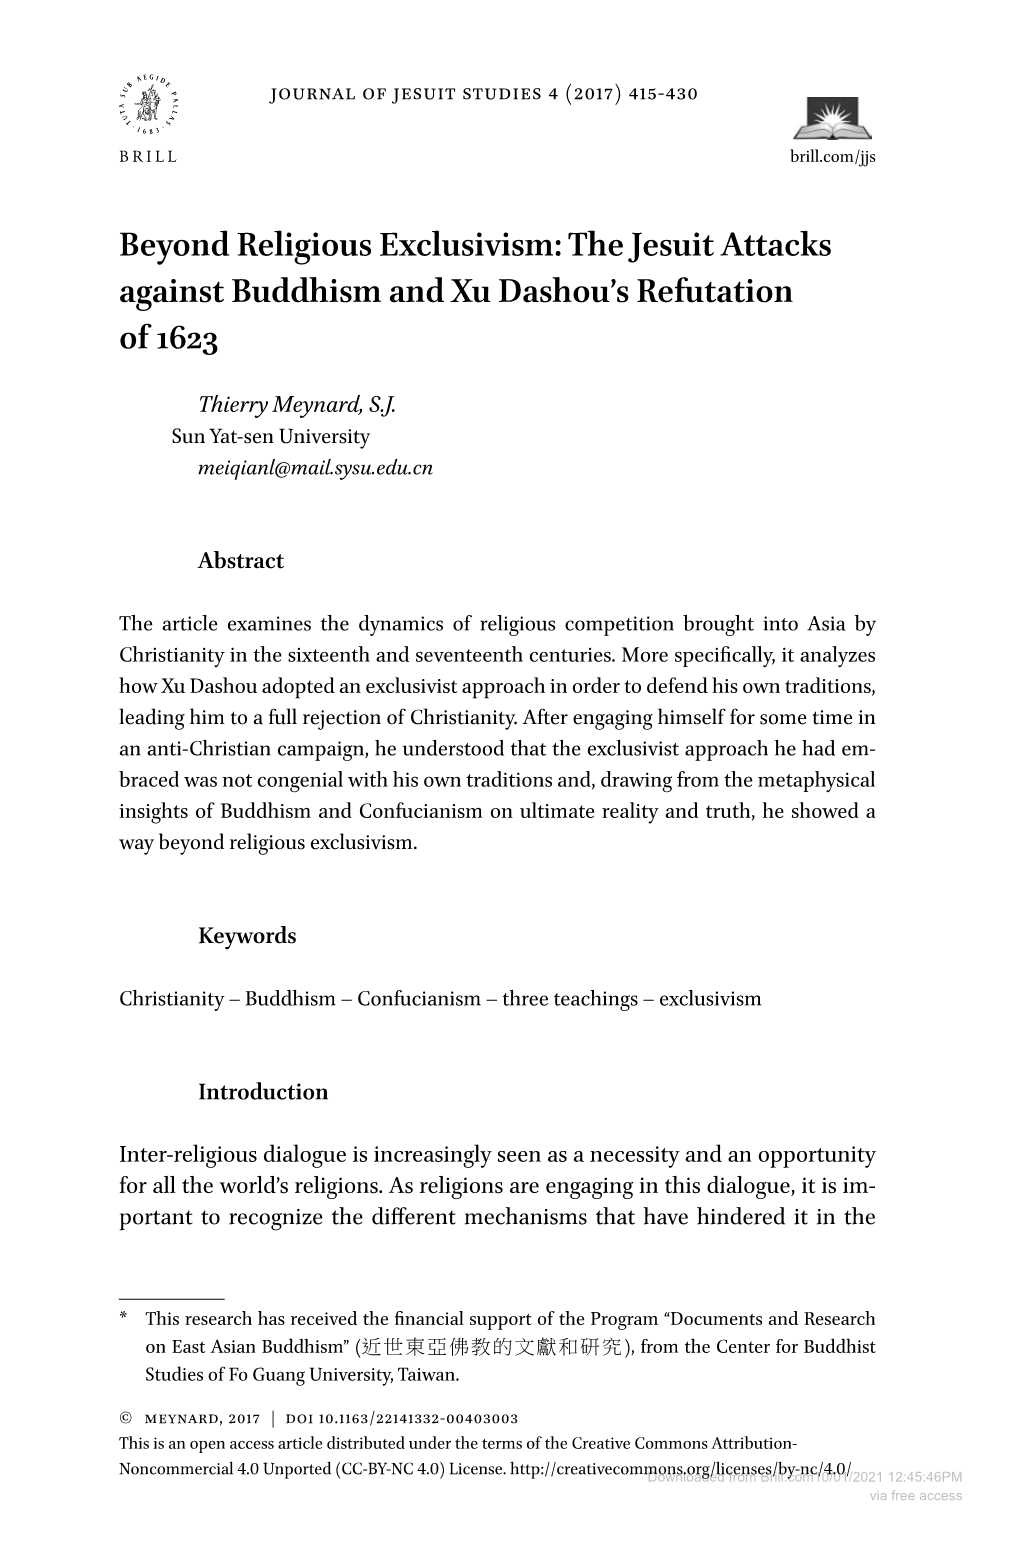 Beyond Religious Exclusivism: the Jesuit Attacks Against Buddhism and Xu Dashou’S Refutation of 1623